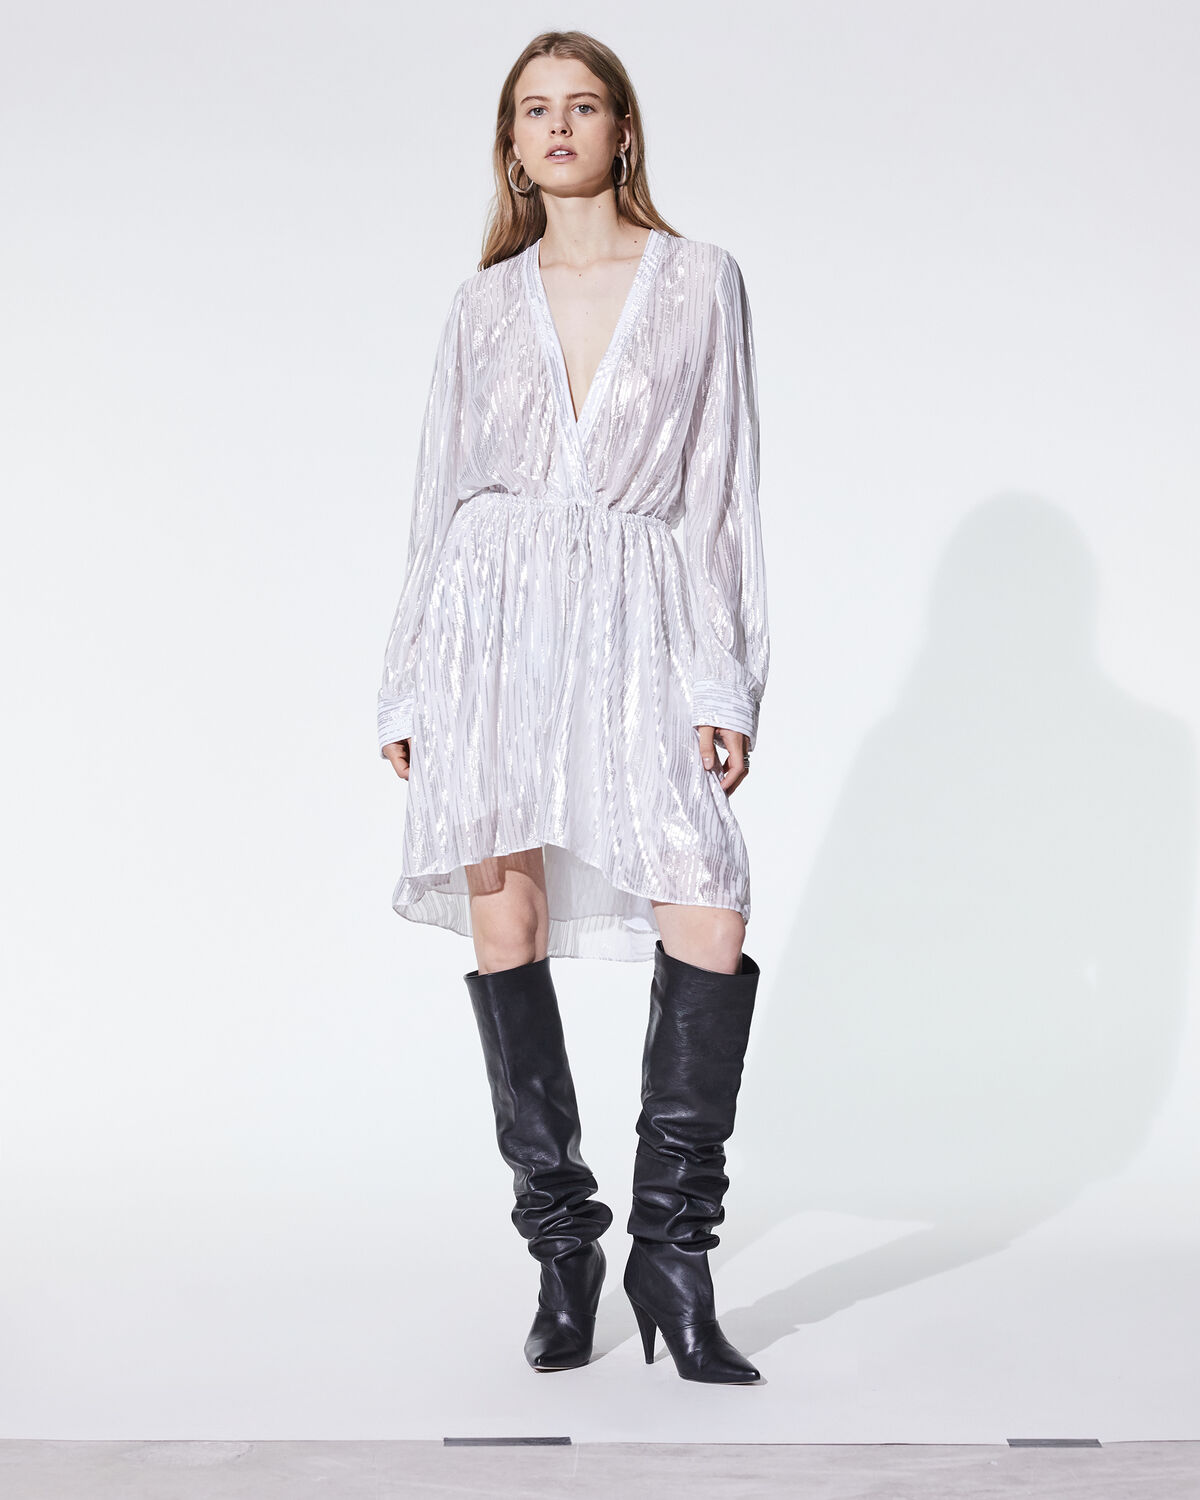 Photo of IRO Paris Chumy Dress Ecru And Silver - Tightenable At The Waist With Its Silvery Lurex Stripes, This Wrap Dress Is Perfect For The Mid-season. Fluid And Lightweight, Wear It With A Pair Of Boots To Add A Rock Touch To Your Outfits. Dresses